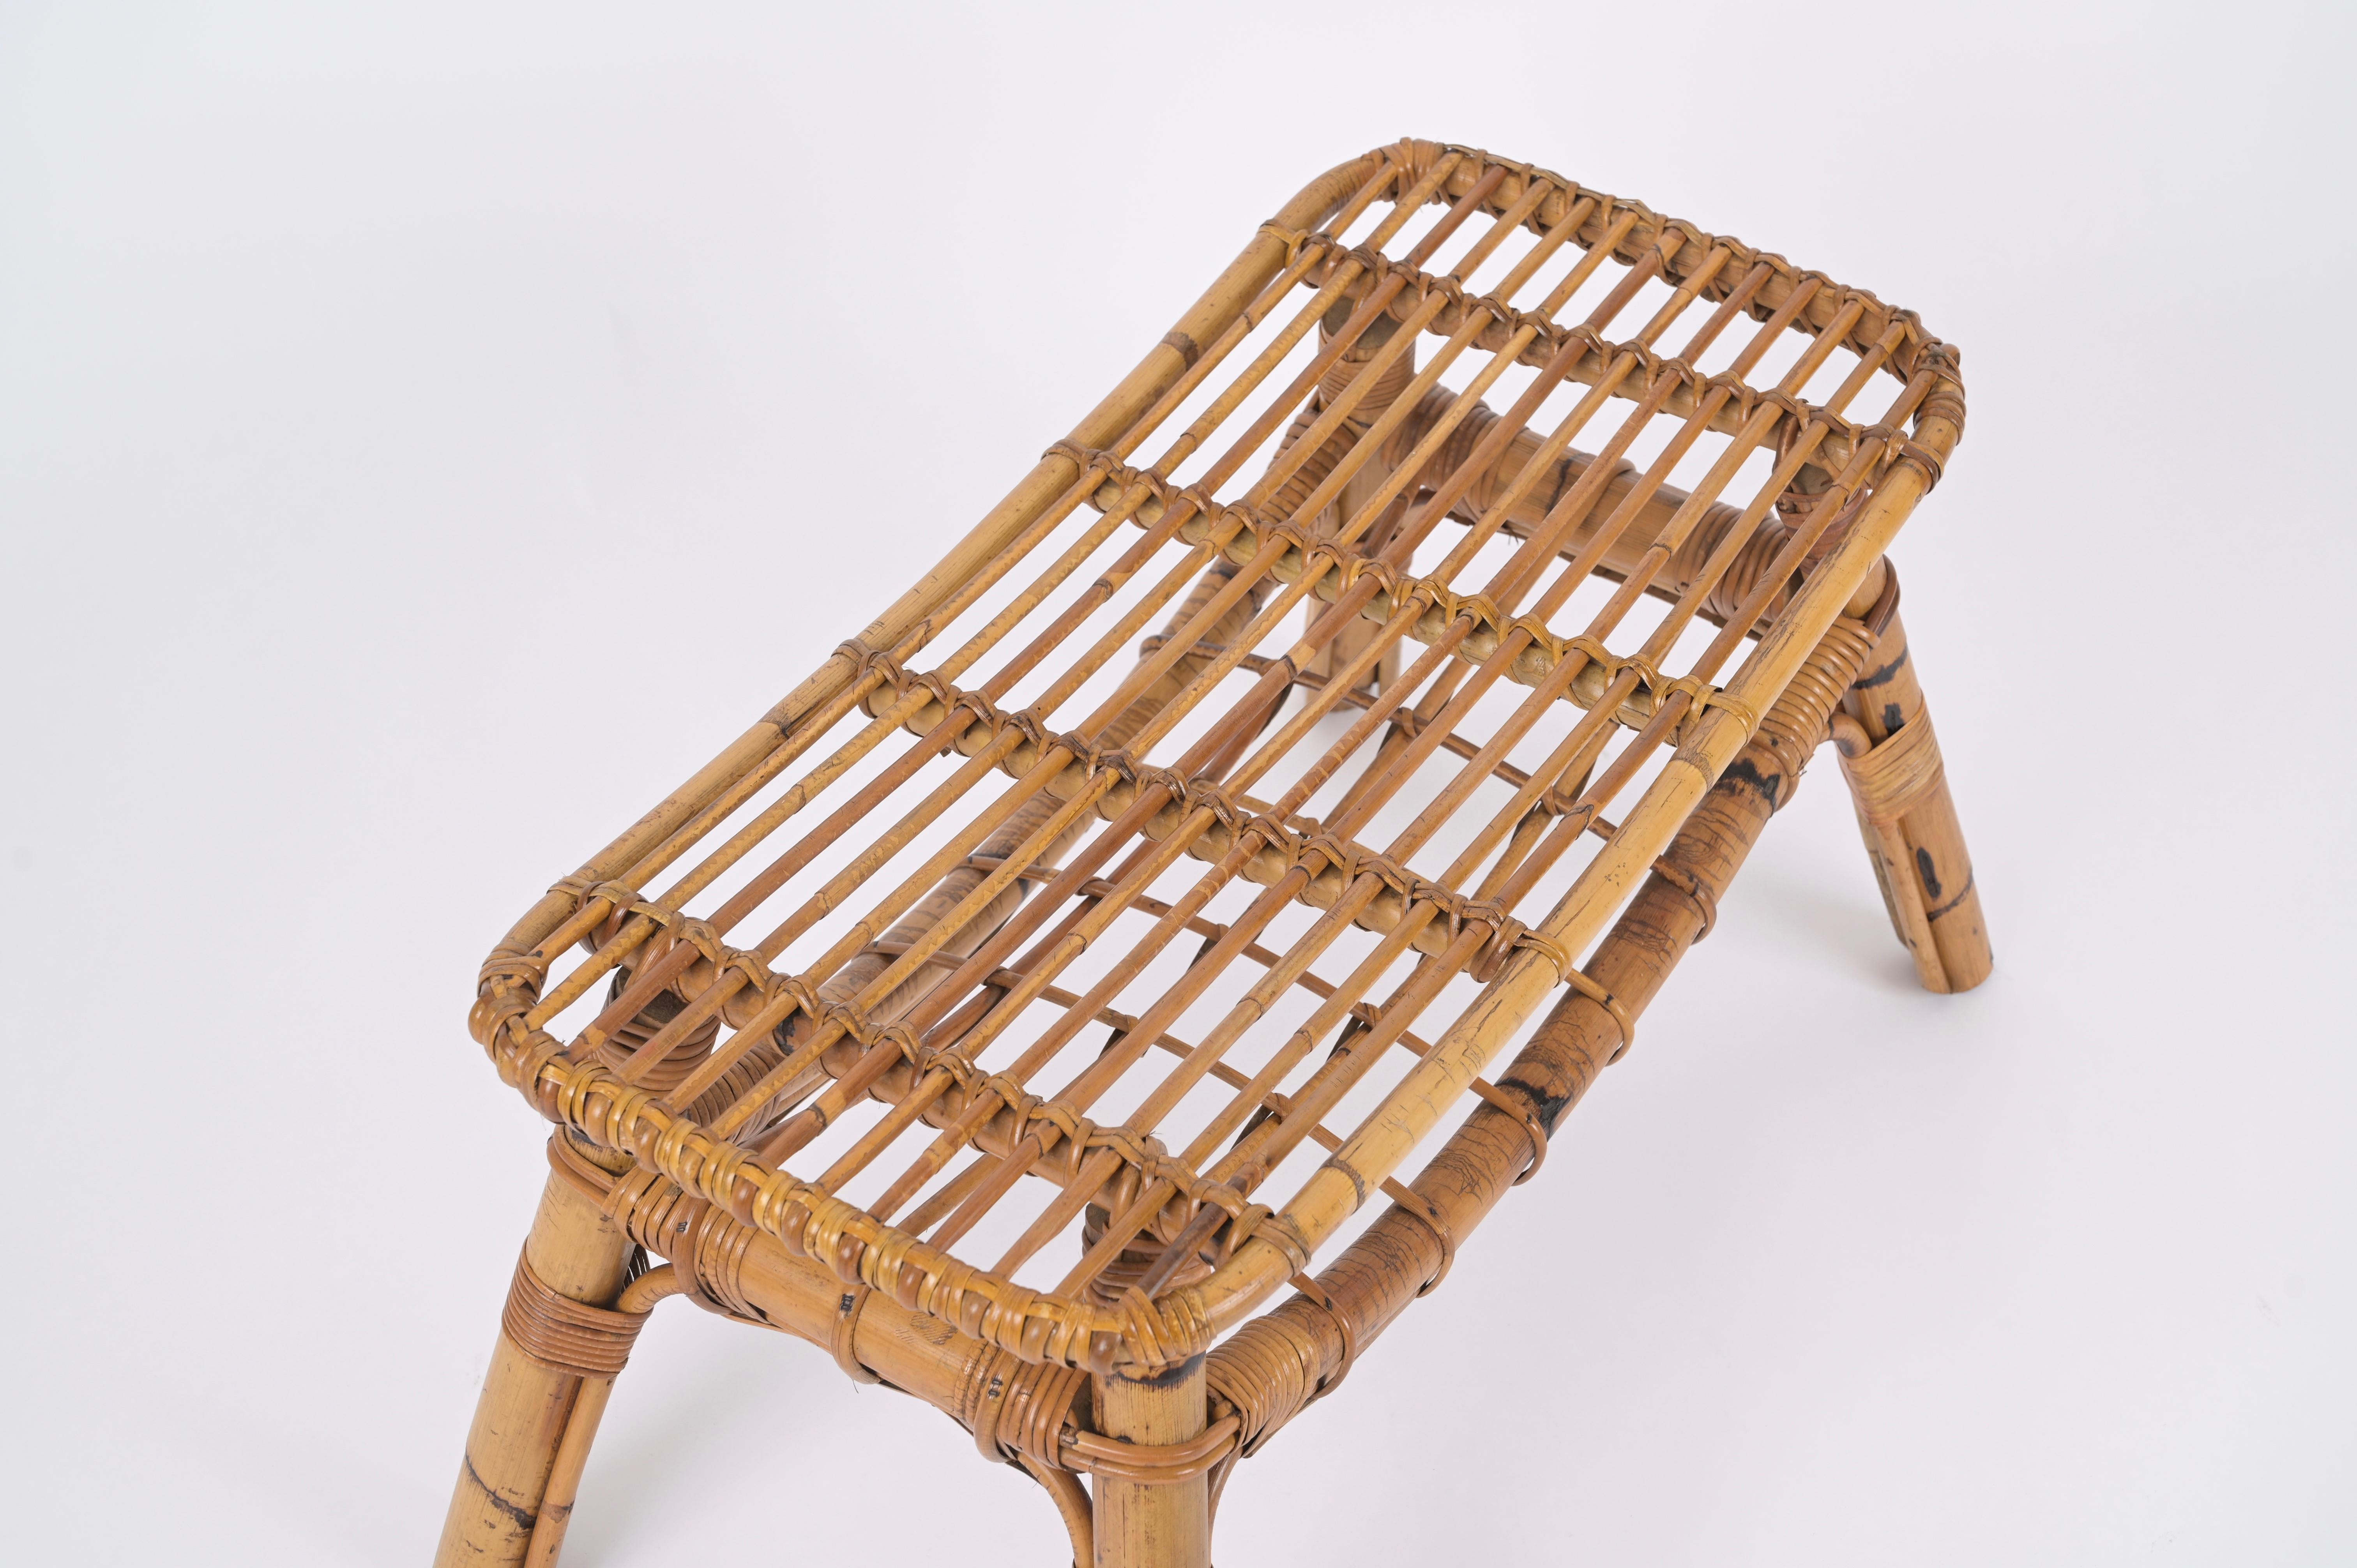 Italian Coffee Table or Bench in Rattan and Wicker by Tito Agnoli, 1960s For Sale 6